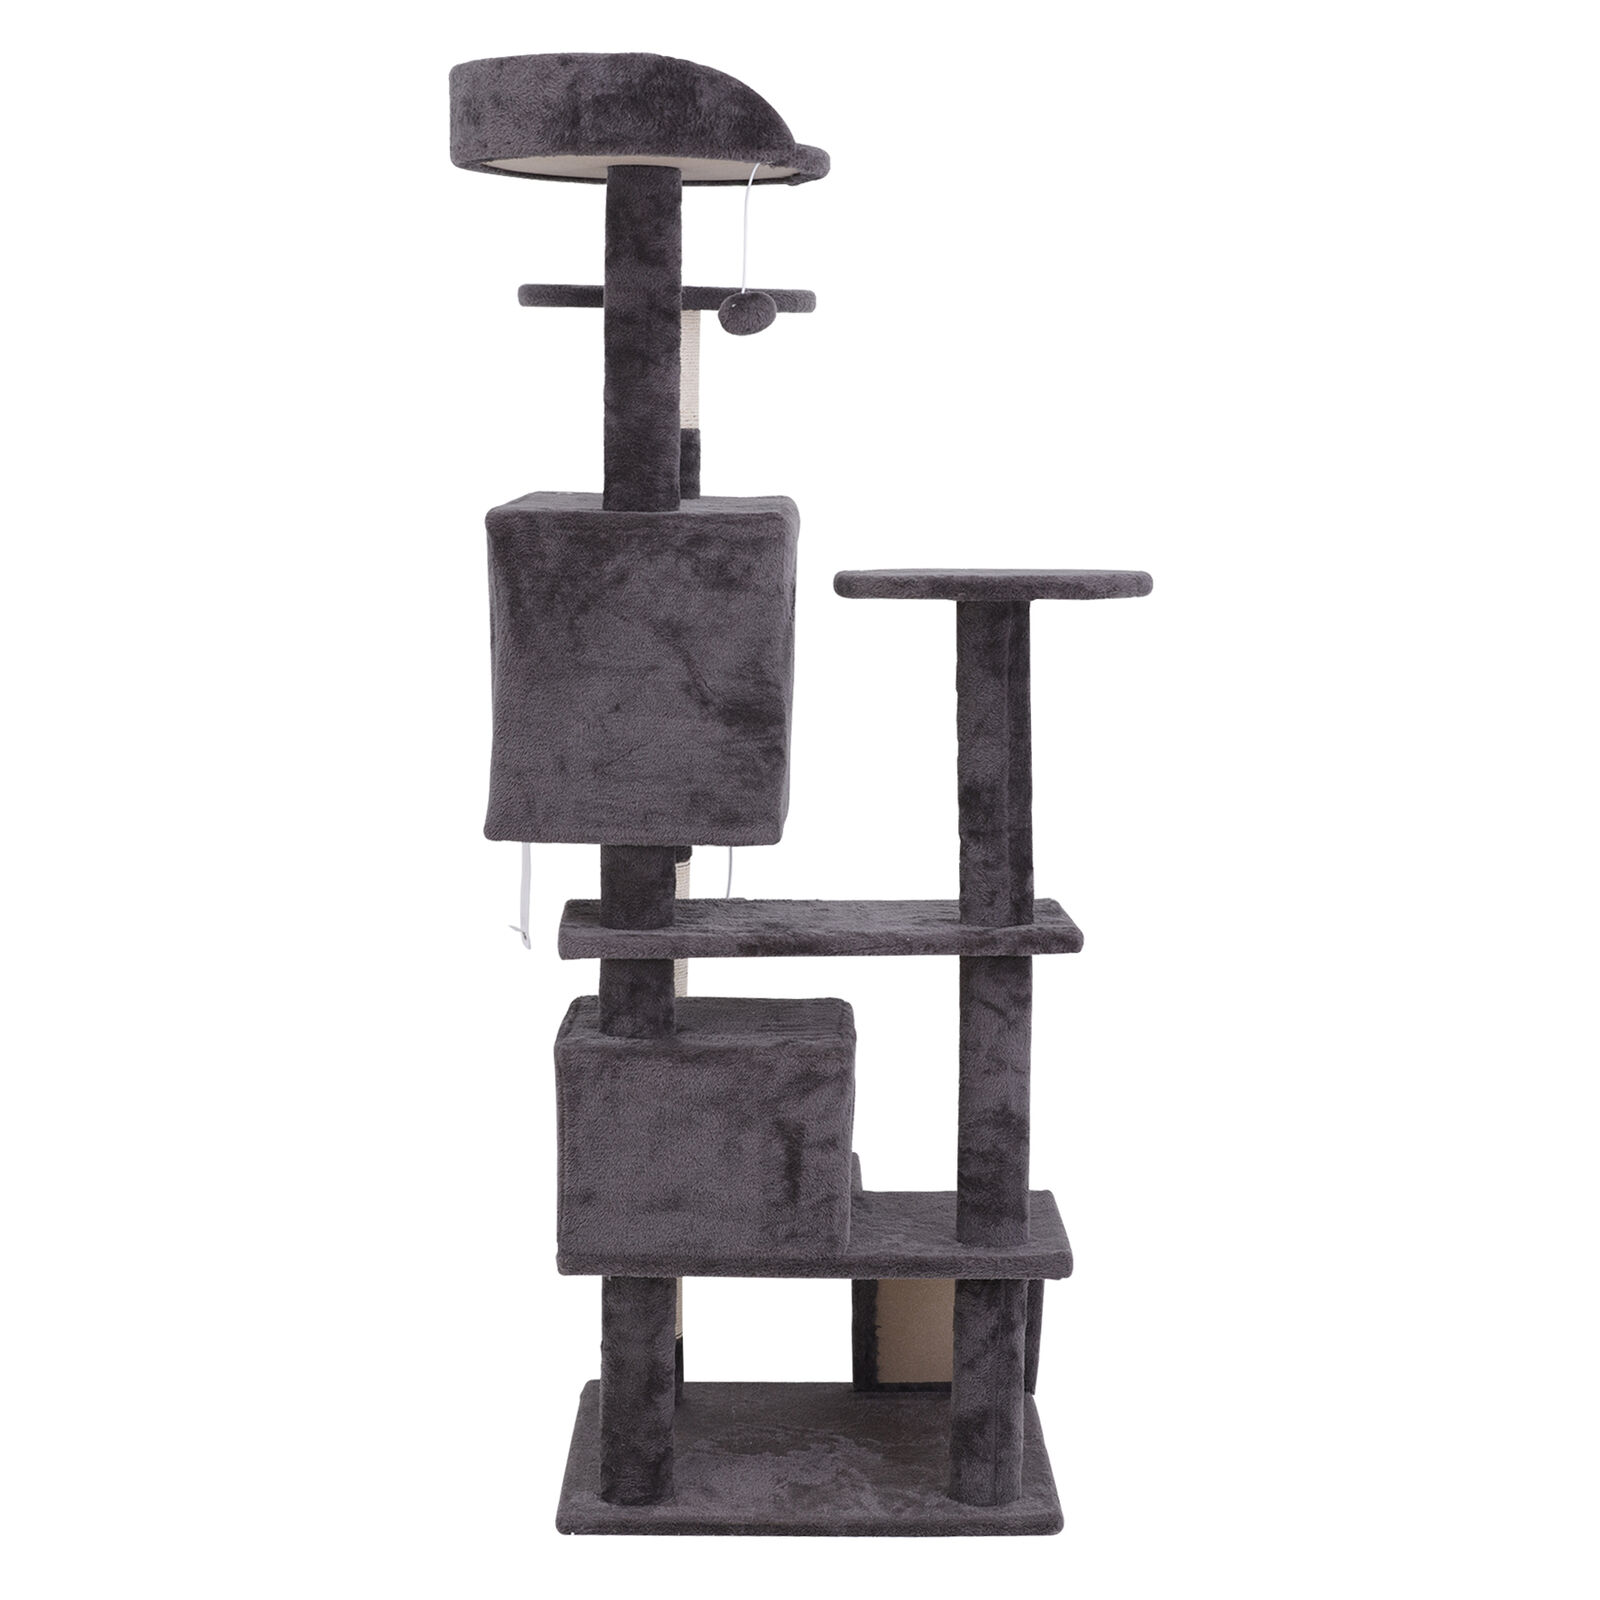 55" STURDY Cat Tree Tower Activity Center Large Playing House Condo For Rest